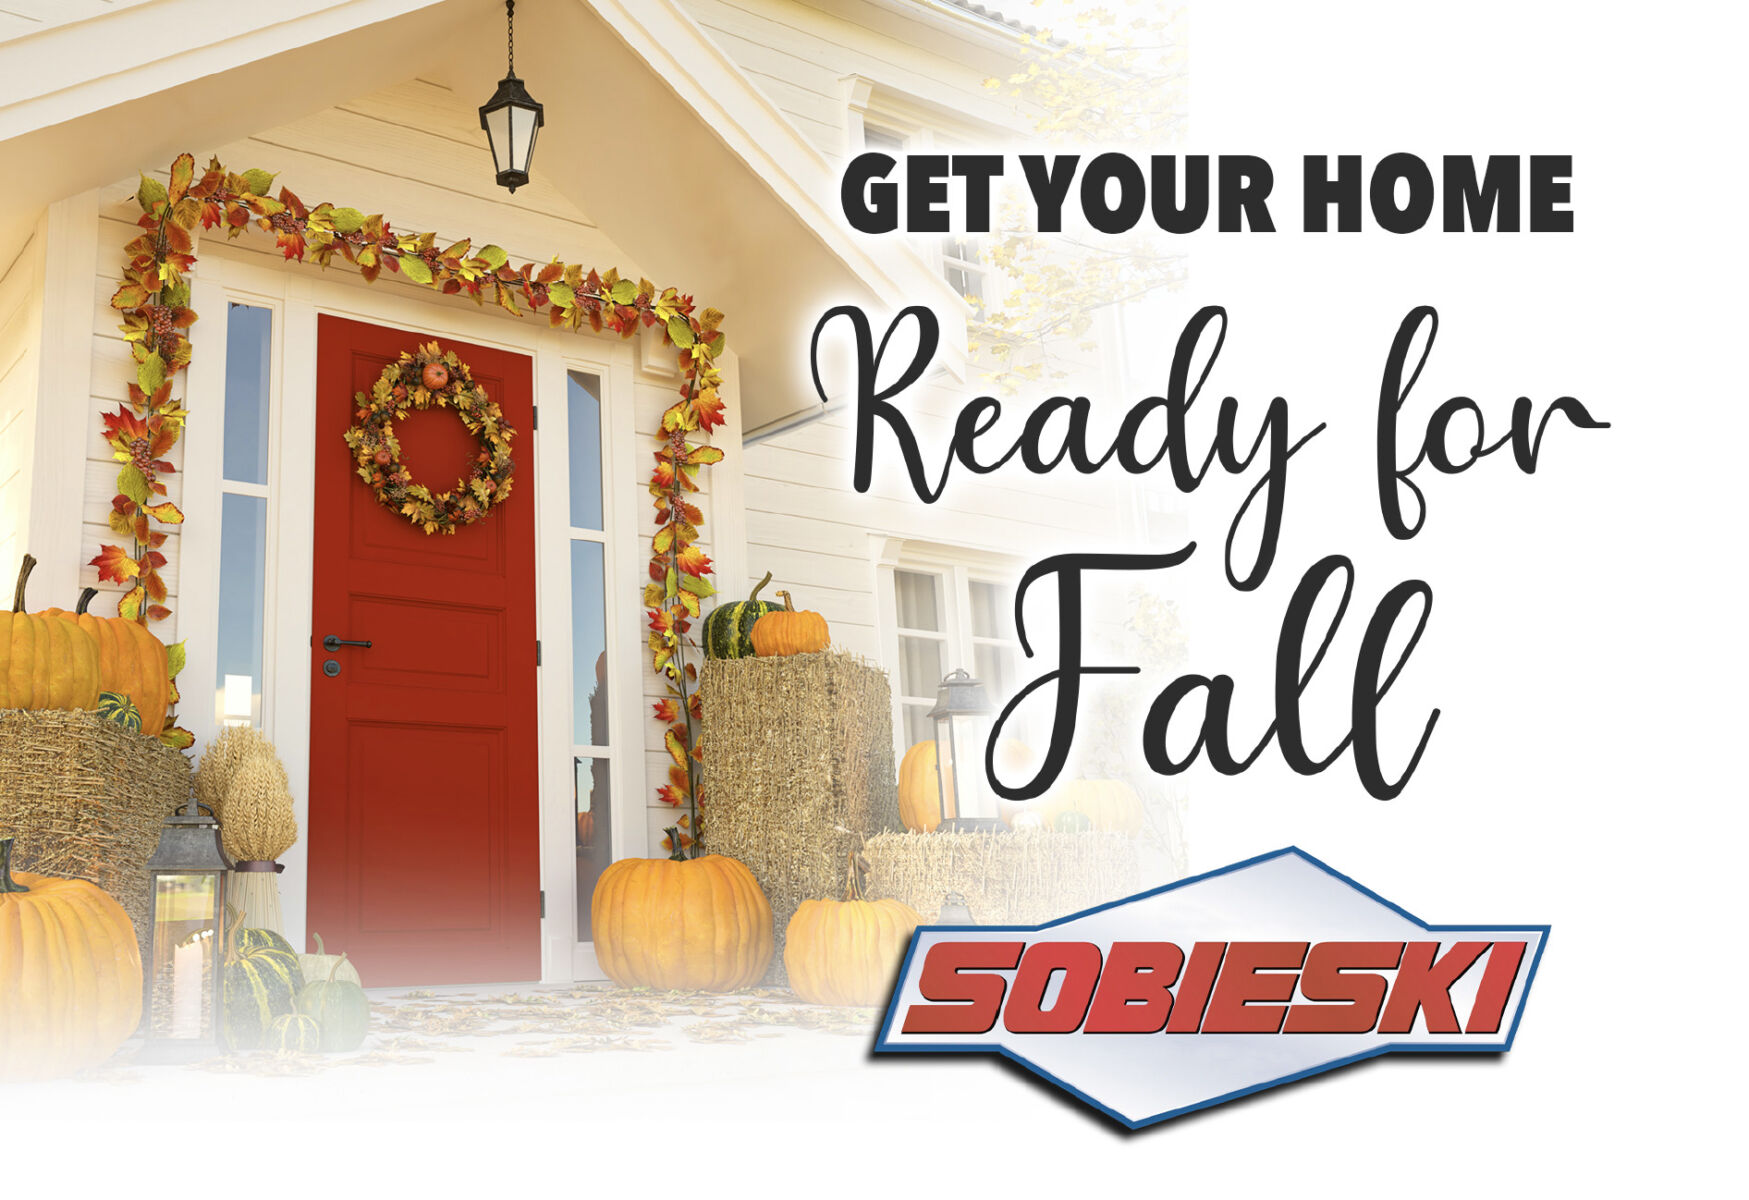 Get your home ready for fall